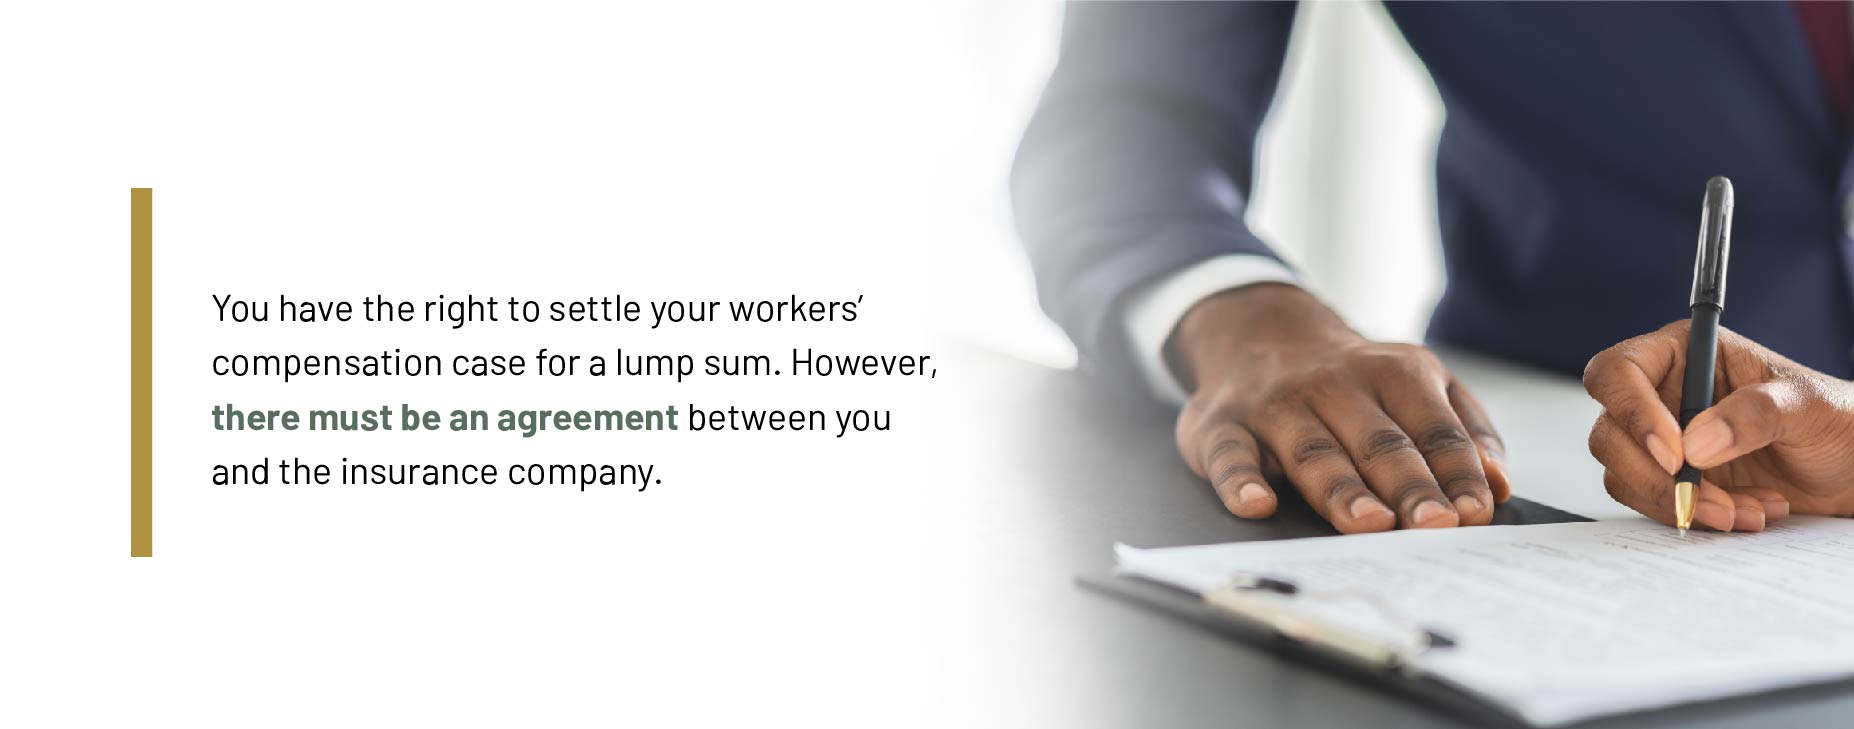 you have the right to settle your workers compensation case for a lump sum